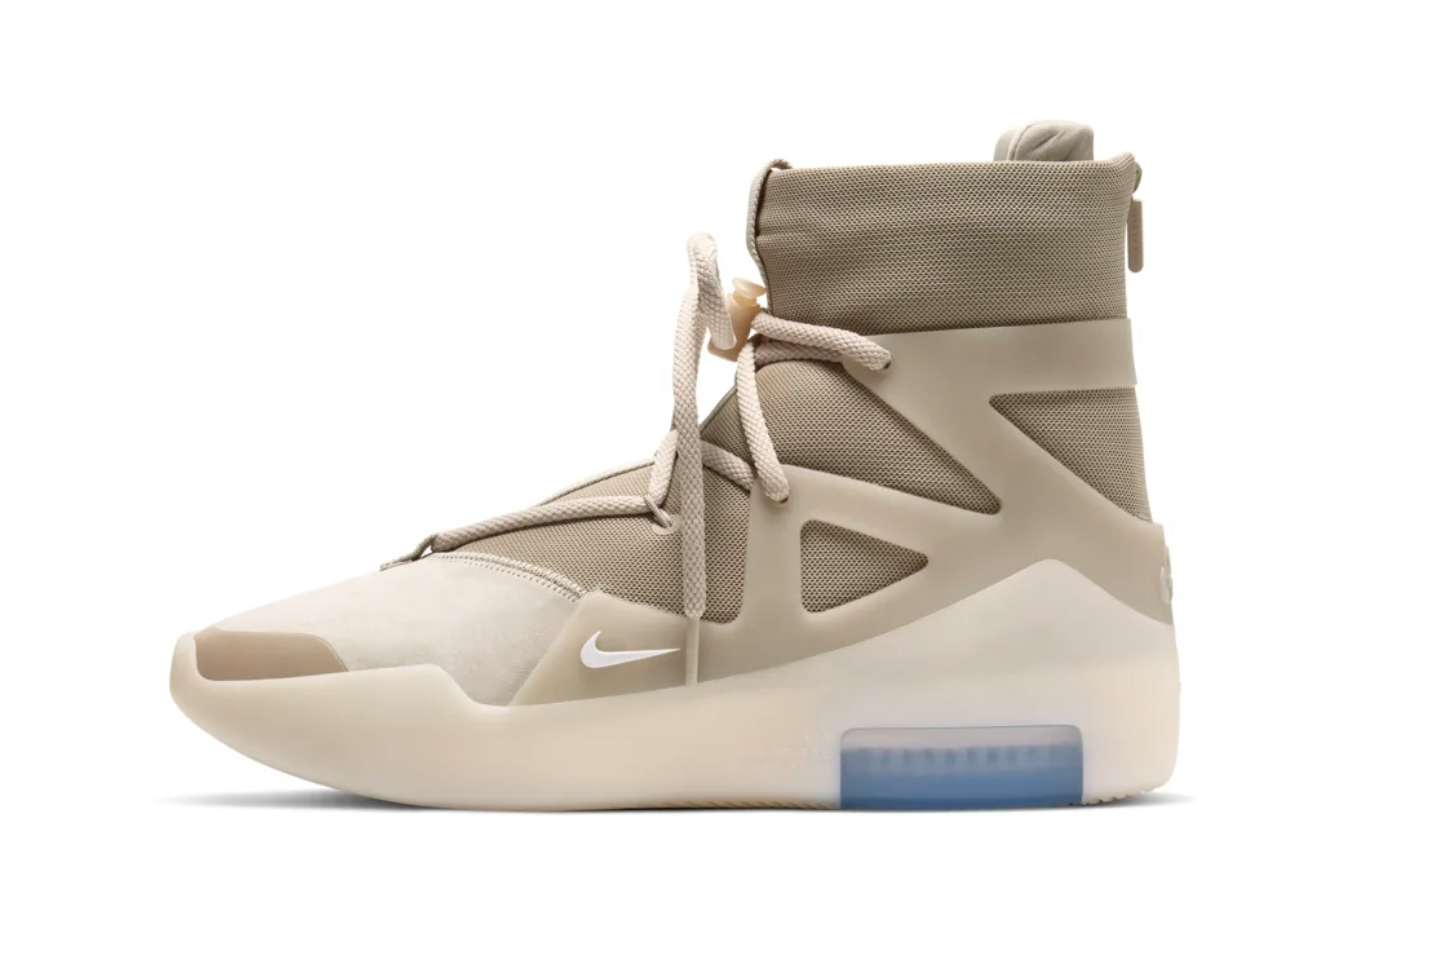 nike air fear of god 1 retail price